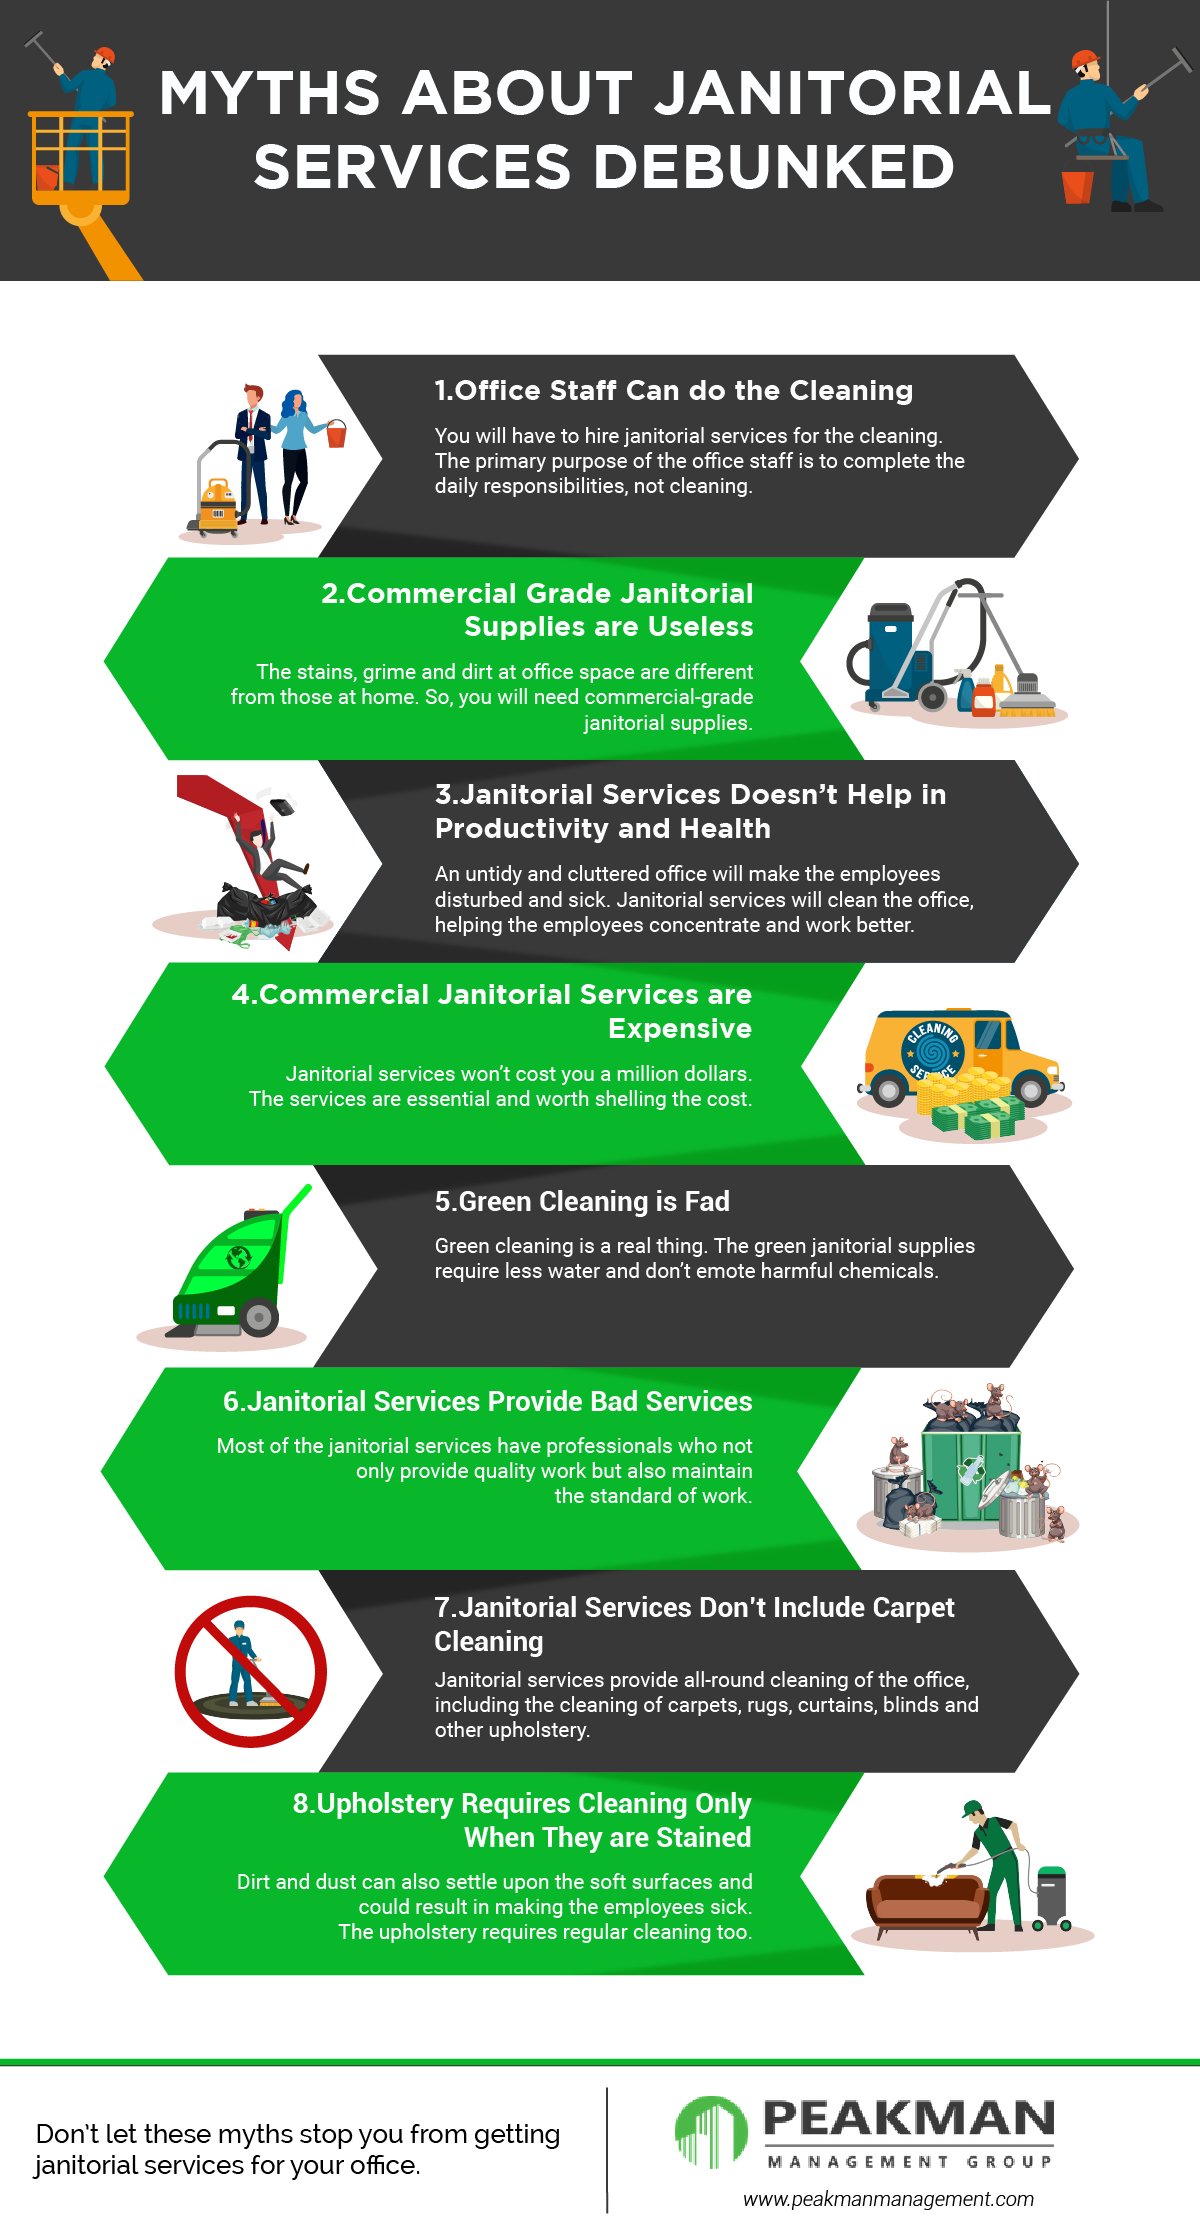 Myths About Janitorial Services